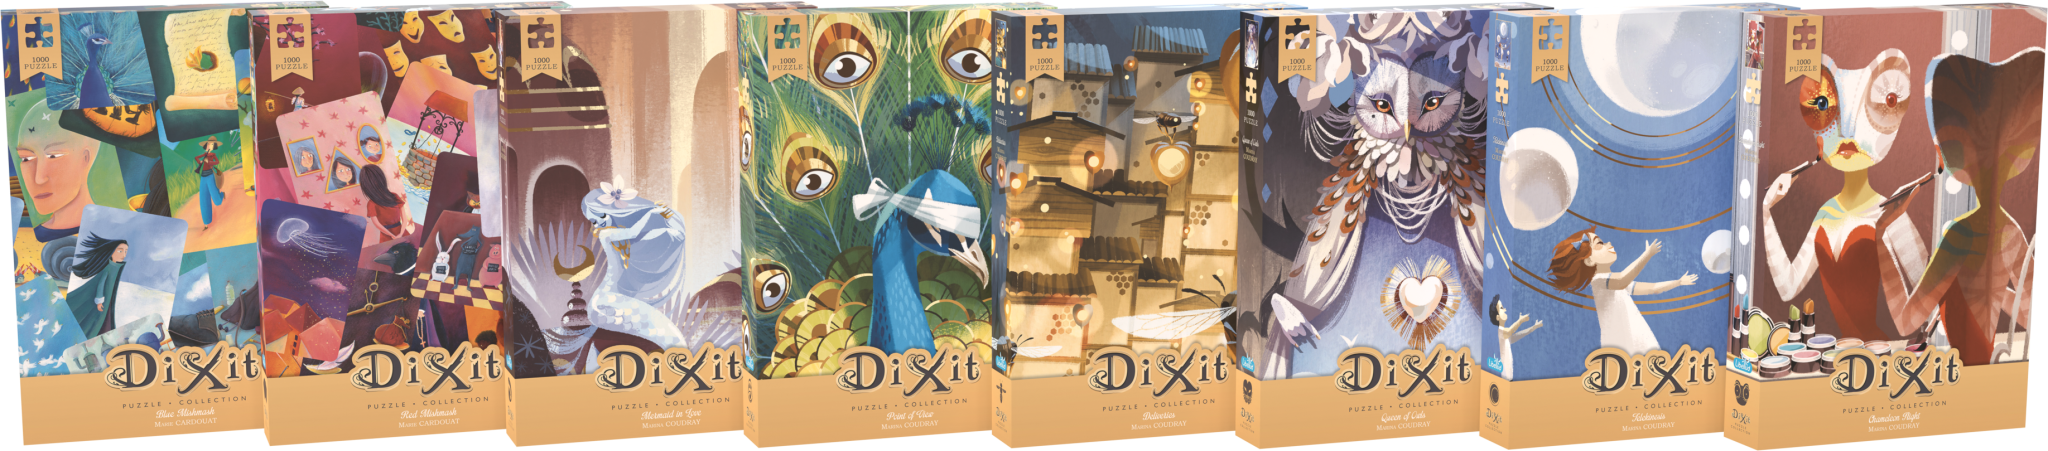 DIXIT PUZZLE_ALL_1000_LD